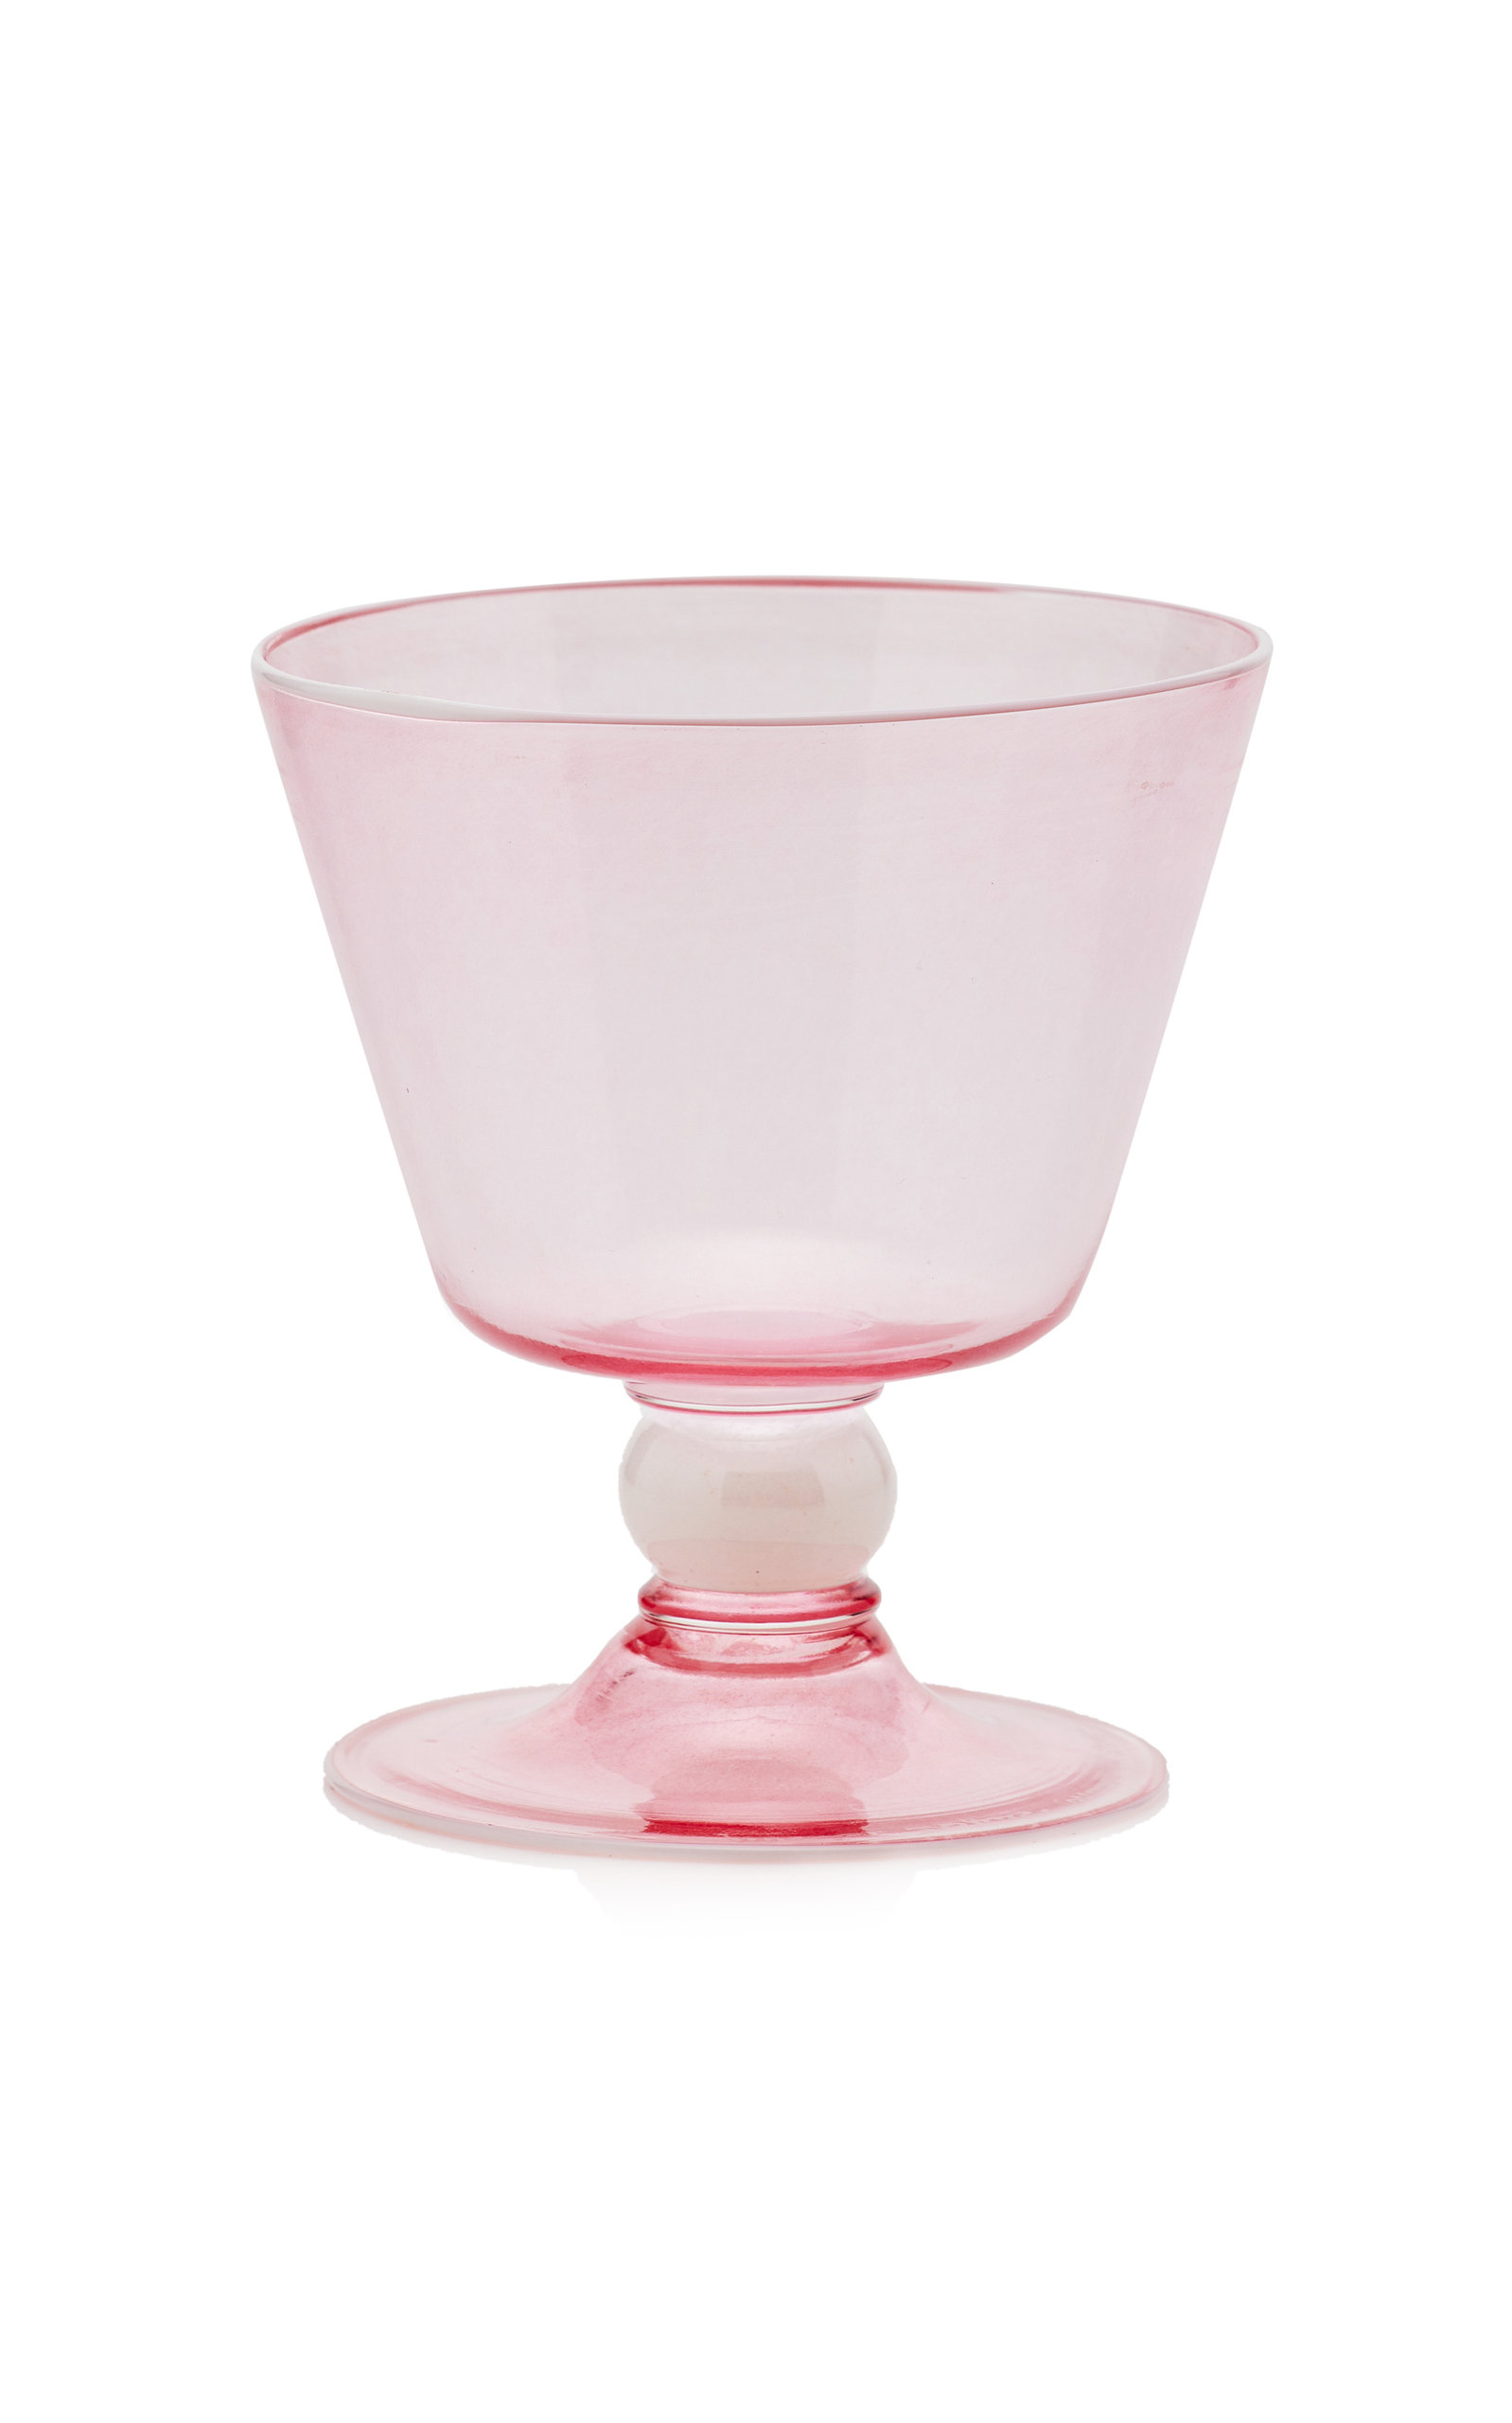 Moda Domus Footed Wine Glass In Yellow,pink